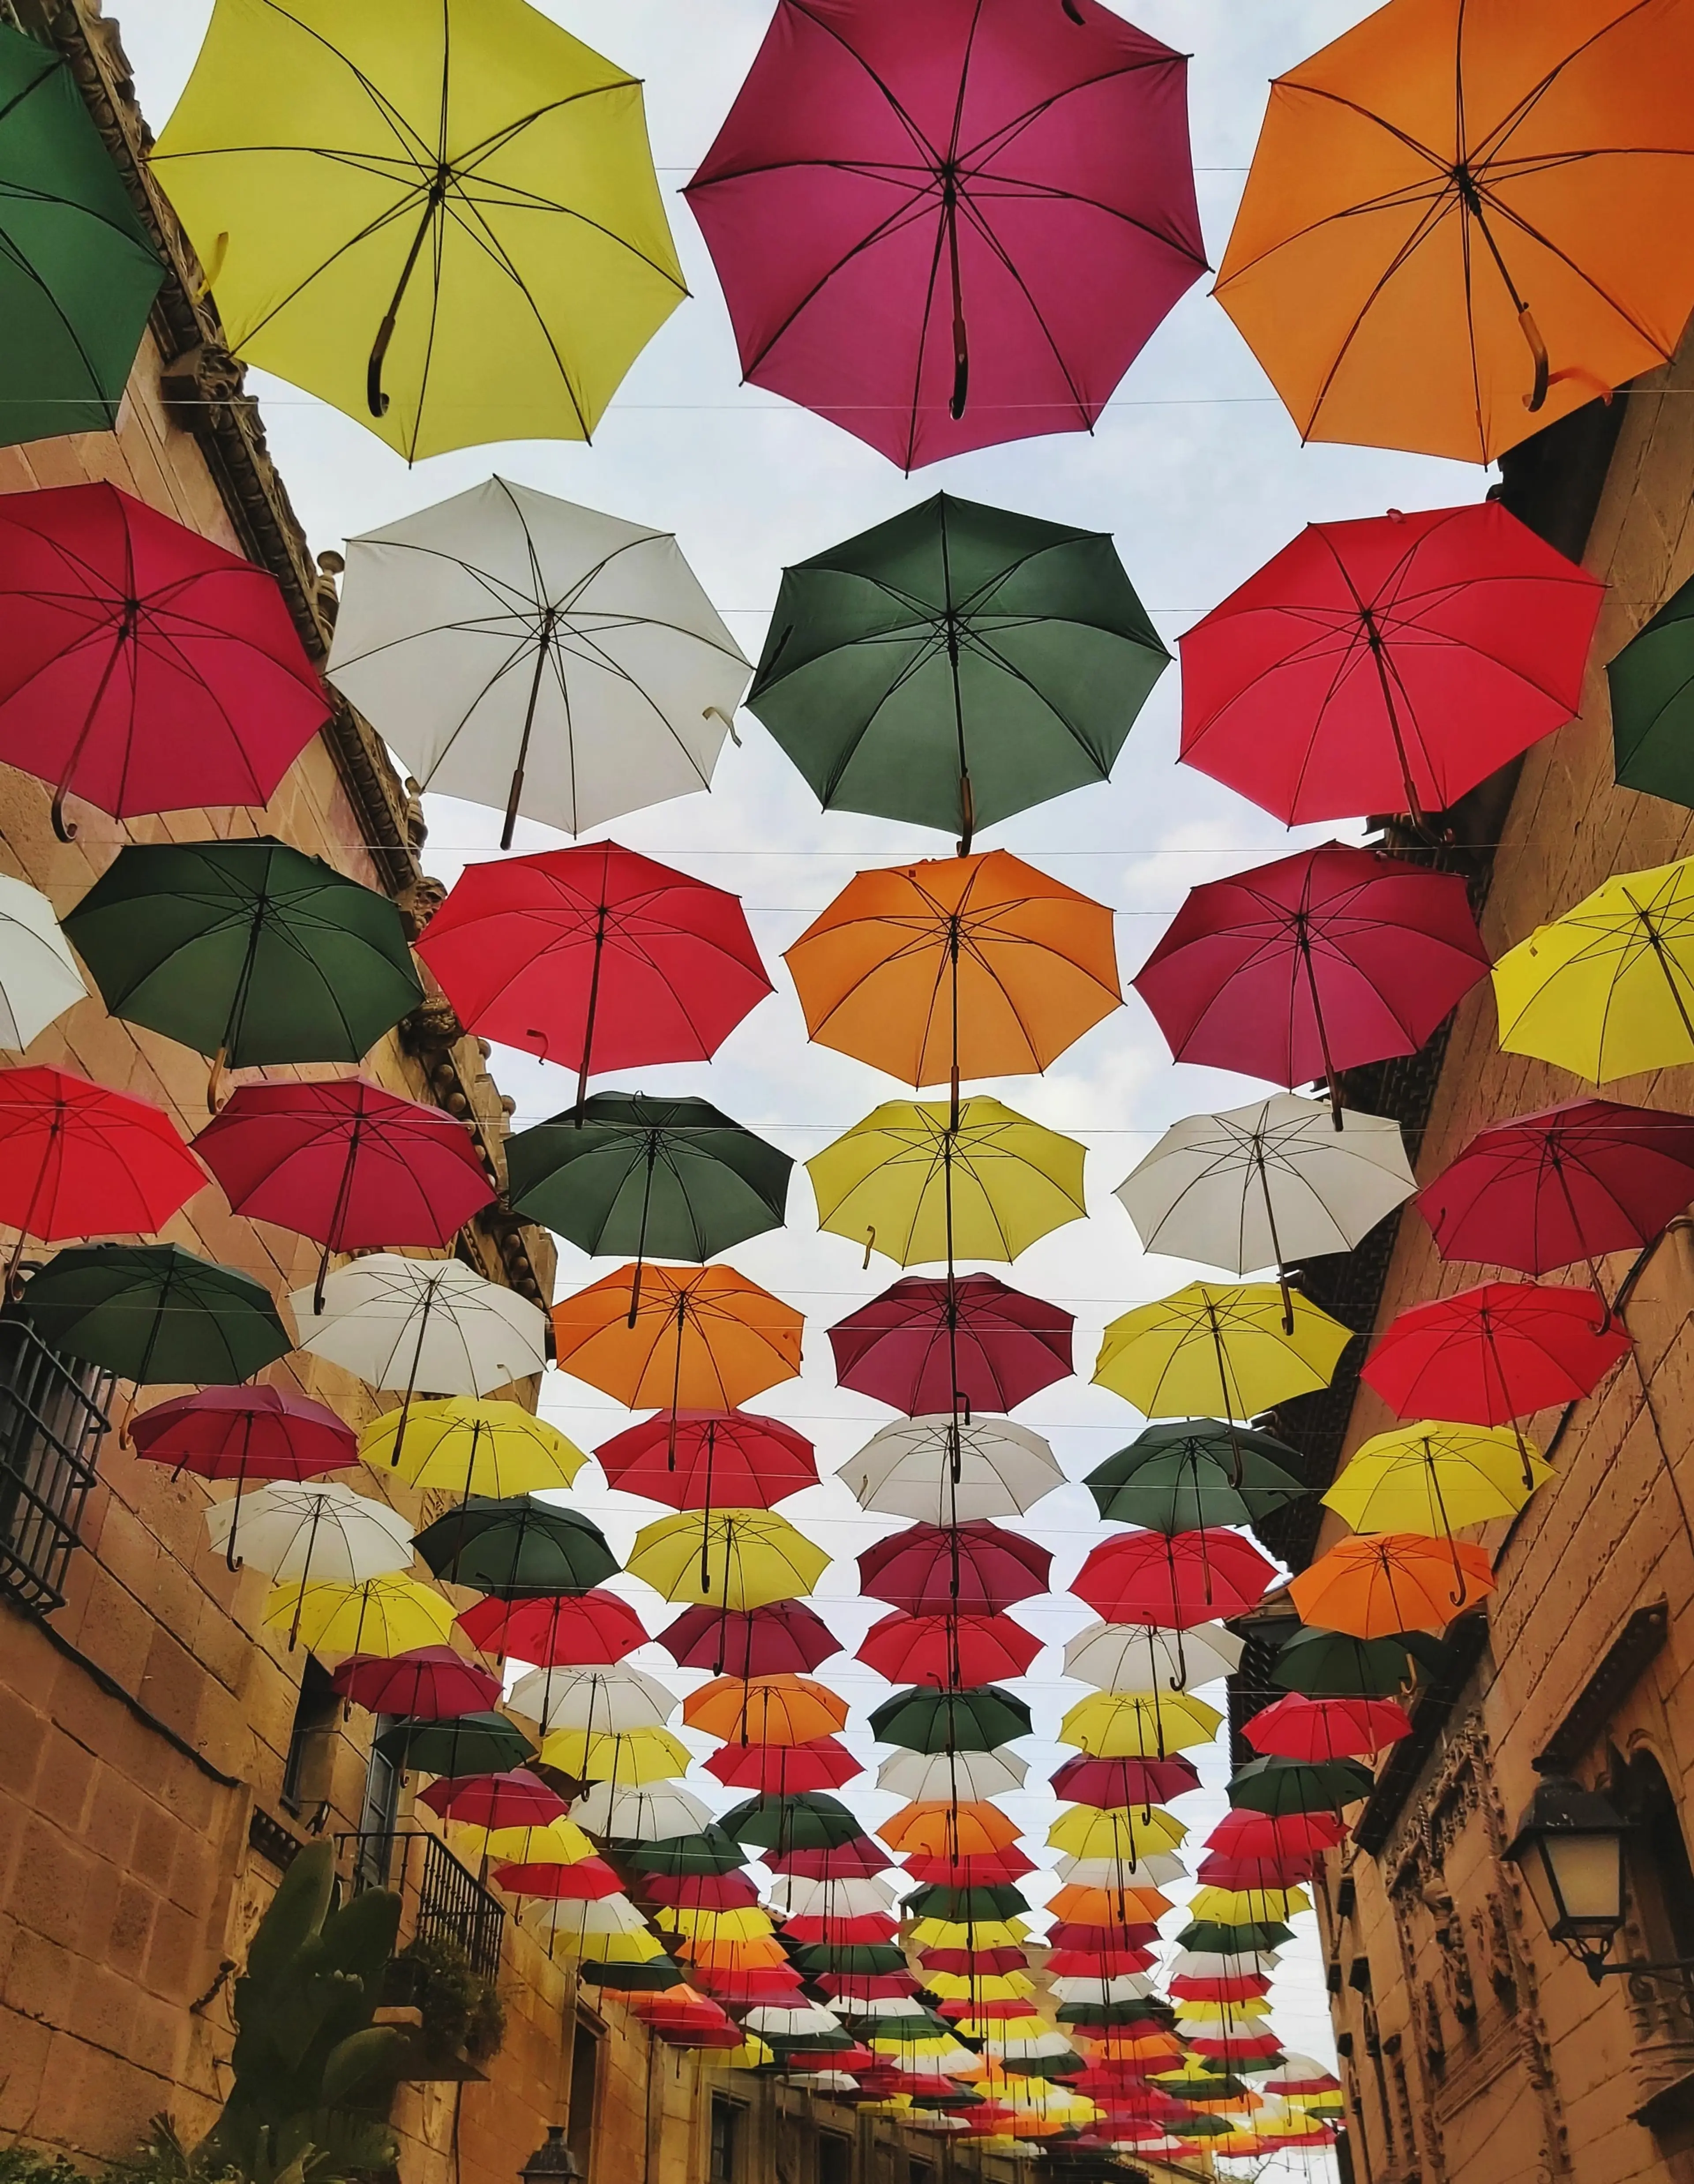 Colorful umbrellas hanging across a typical street in the city center